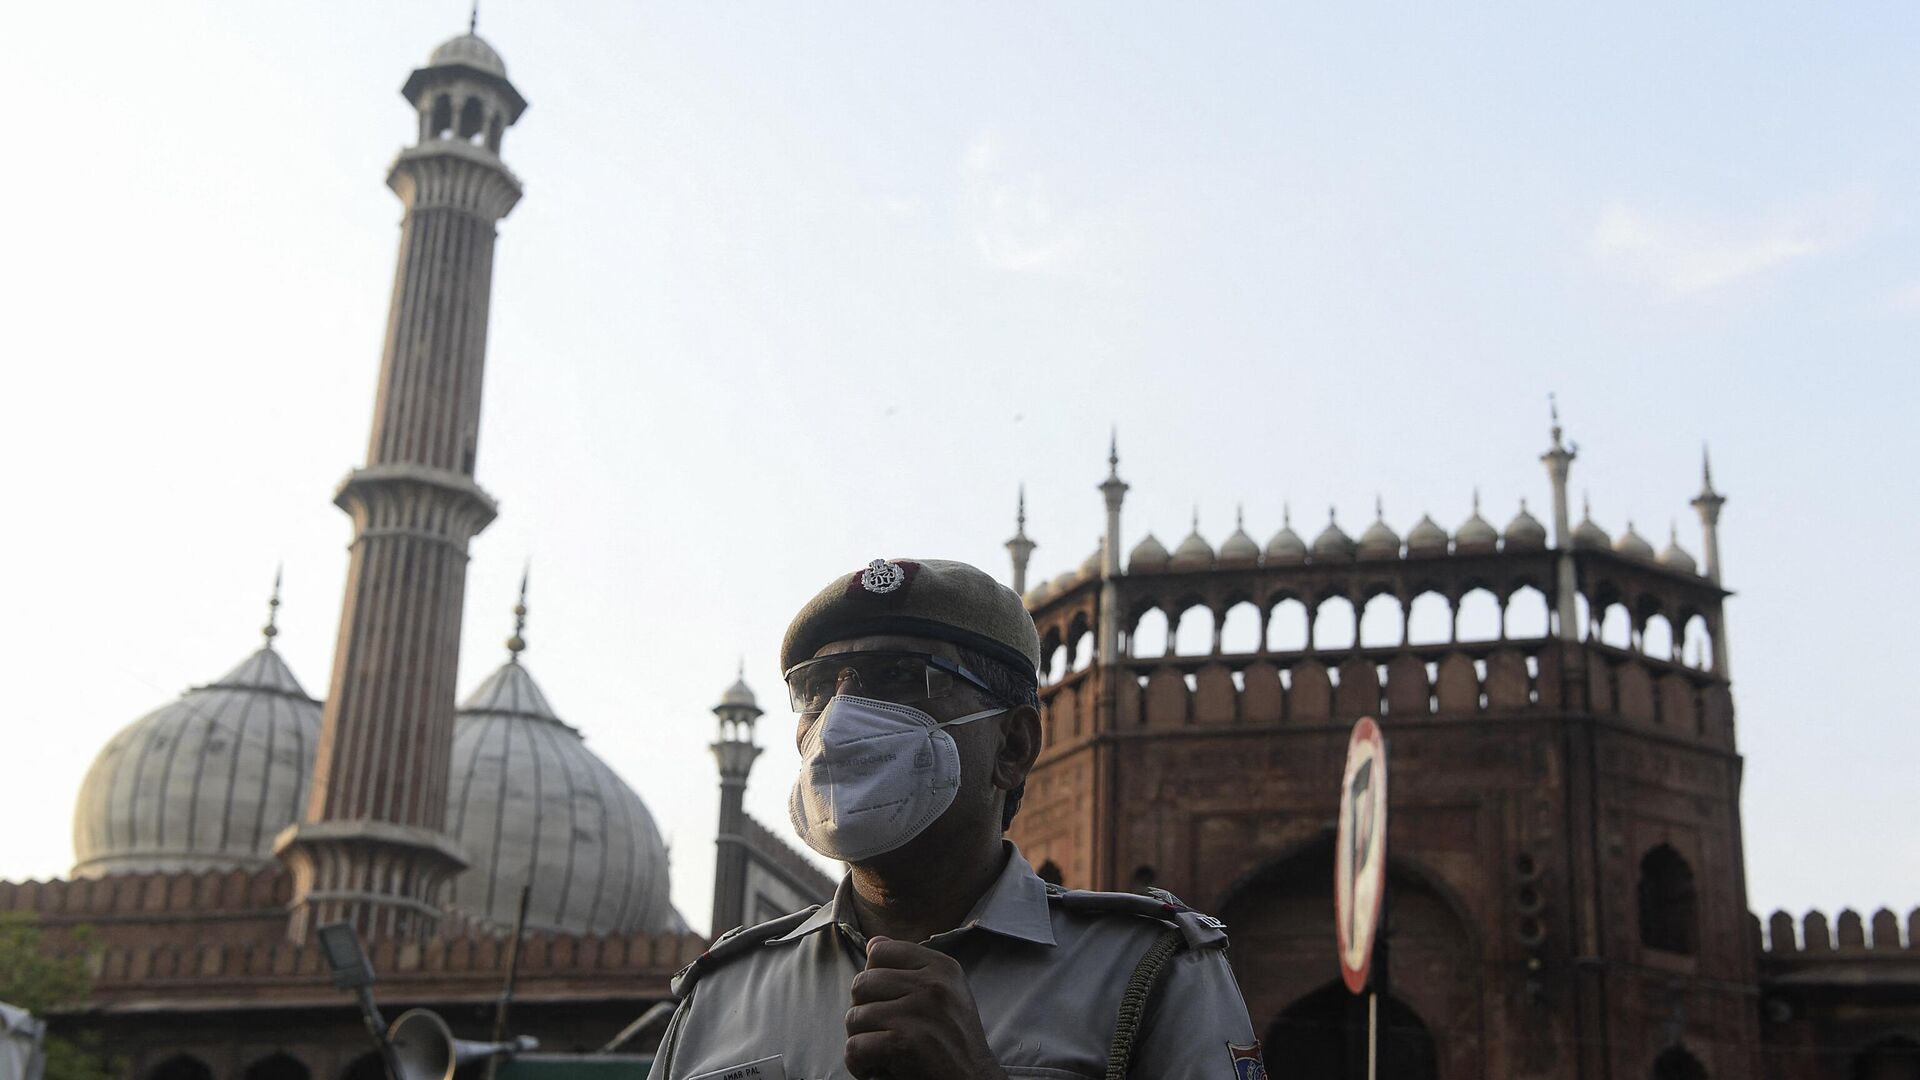 A police officer stands guard outside Jama Masjid during a government-imposed nationwide lockdown as a preventive measure against the spread of the COVID-19 coronavirus, in the old quarters of New Delhi on April 25, 2020. (Photo by SAJJAD HUSSAIN / AFP) - Sputnik India, 1920, 25.01.2023